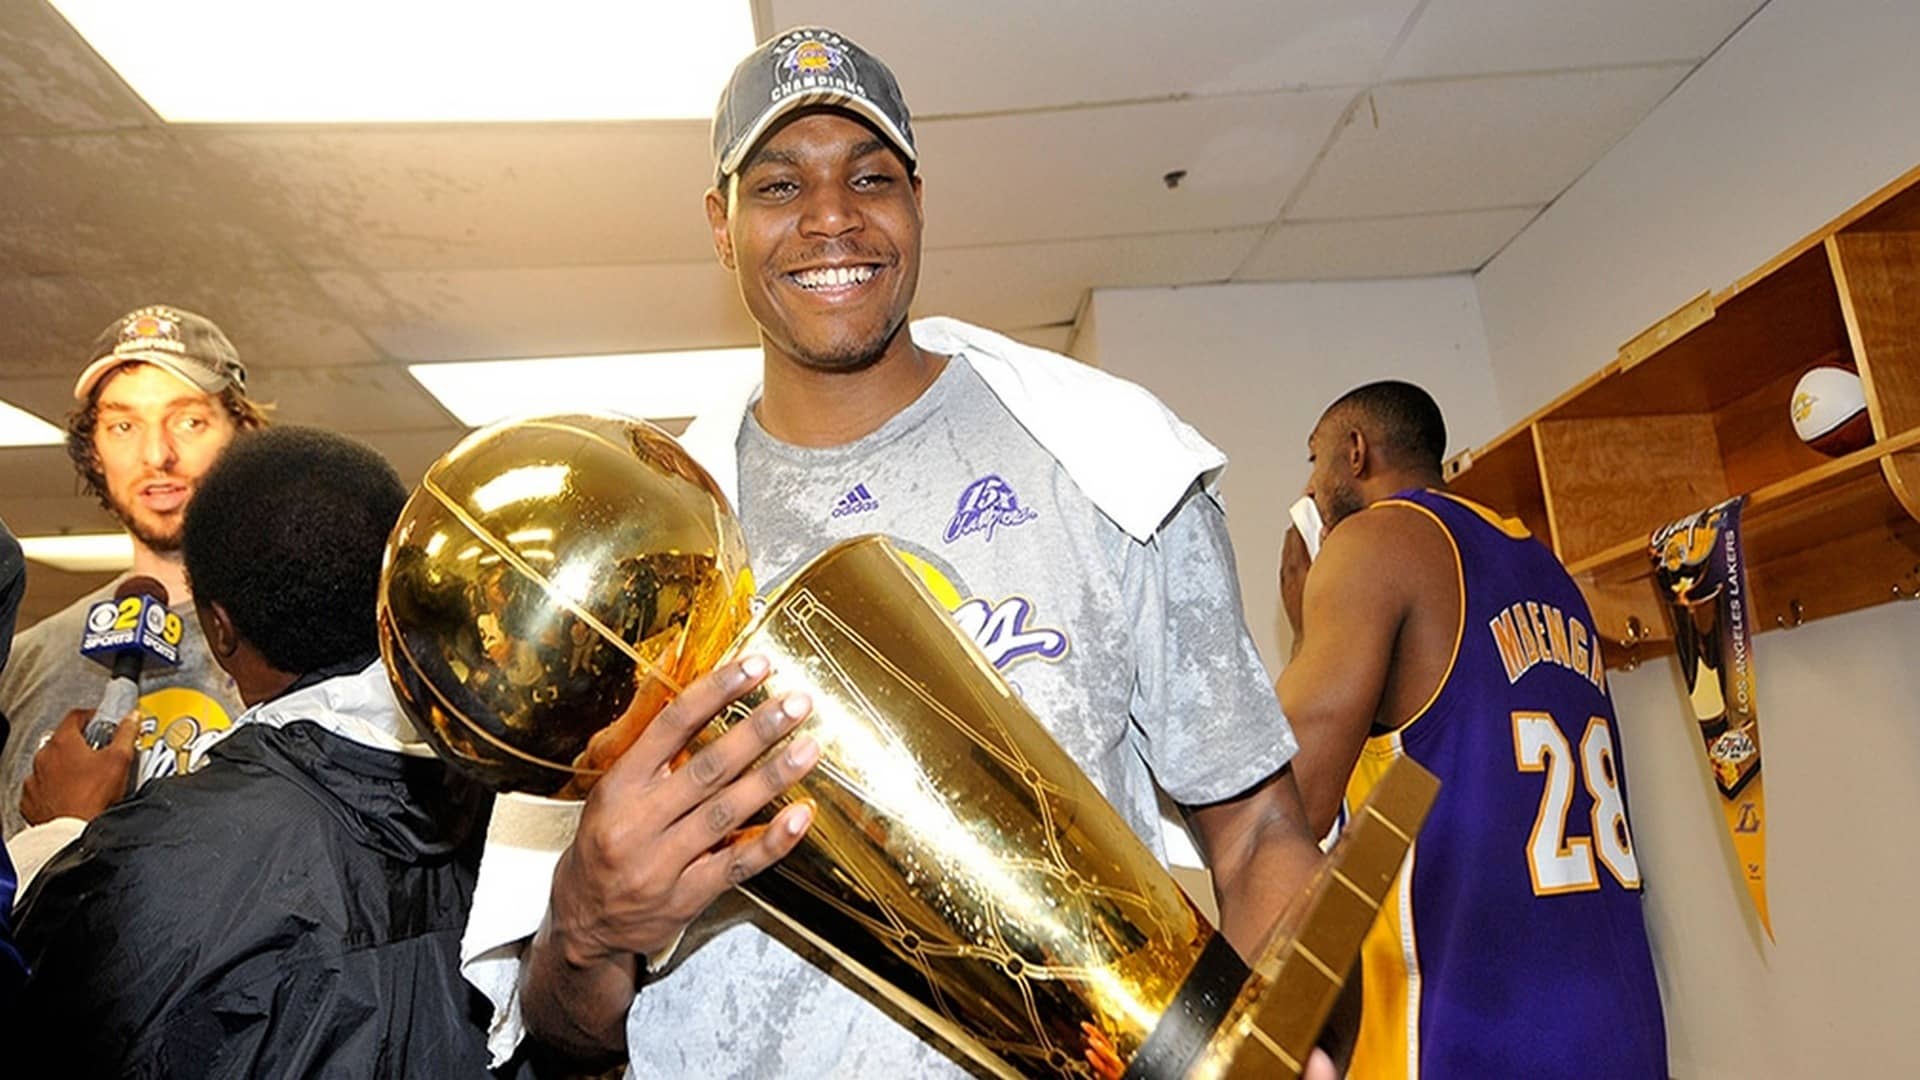 Bynum became the youngest player to ever win an NBA title with the Los Angeles Lakers, at just 21 years and 230 days of age.